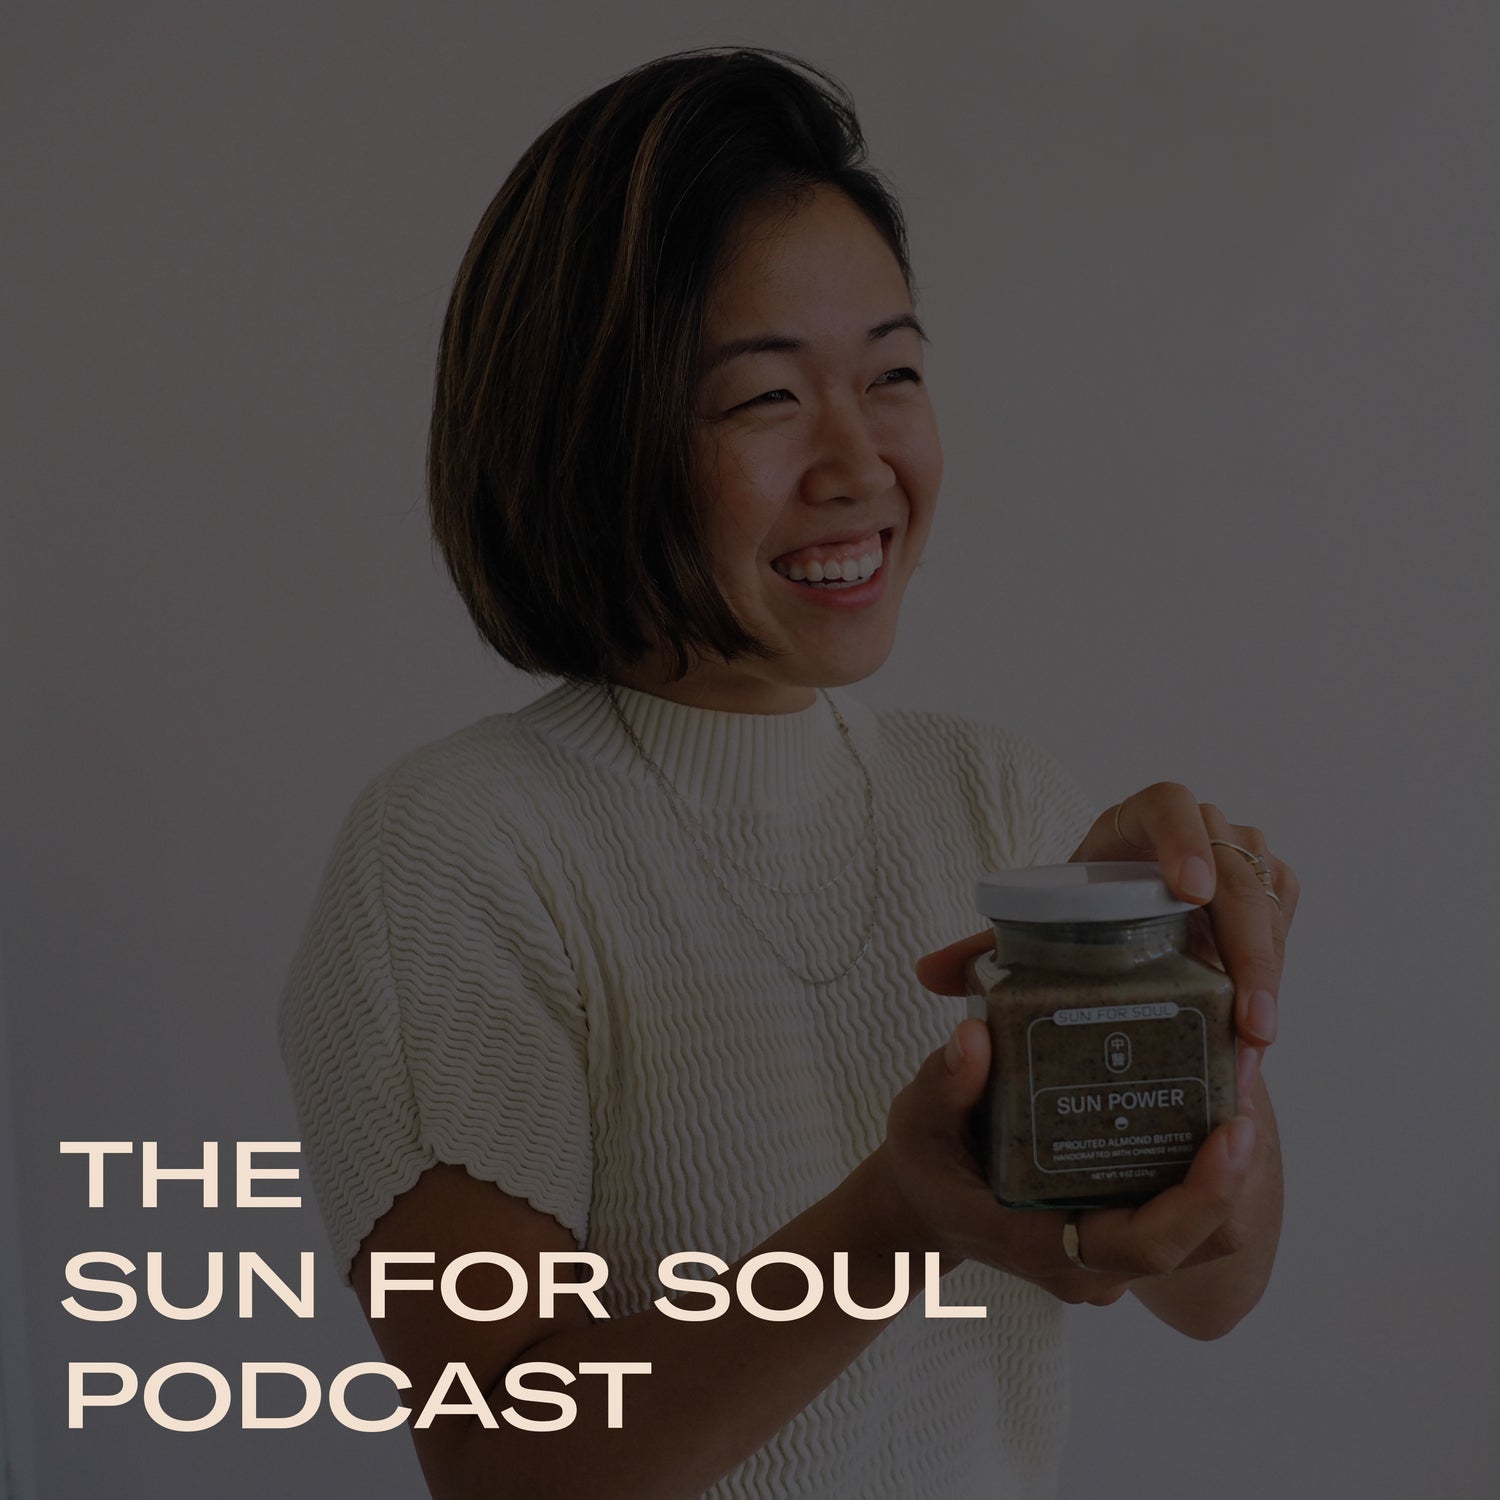 Newly launched: the Sun for Soul Podcast